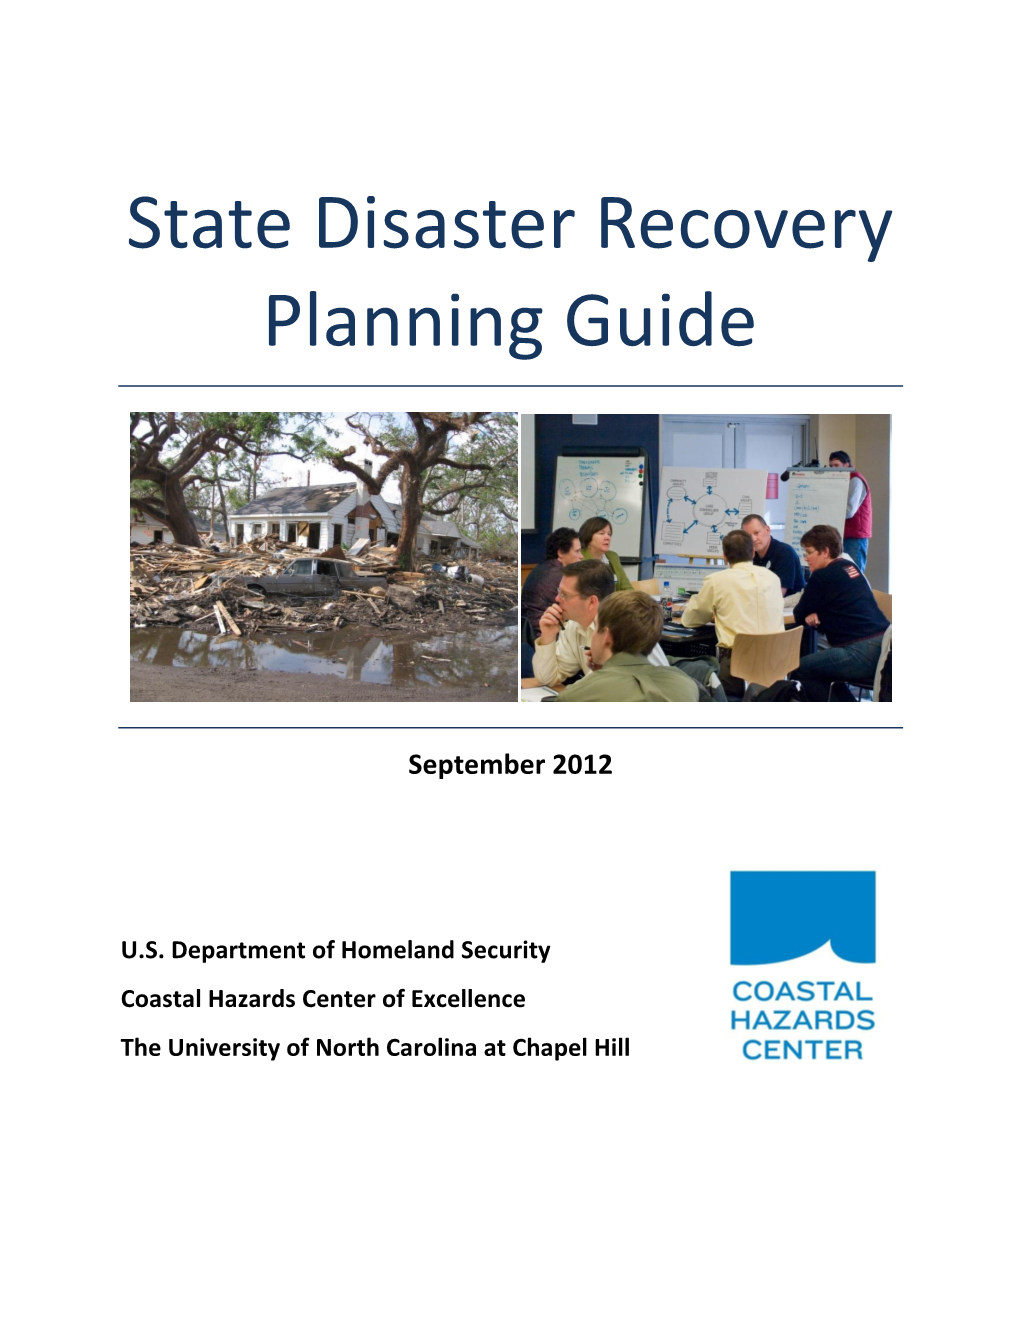 State Disaster Recovery Planning Guide